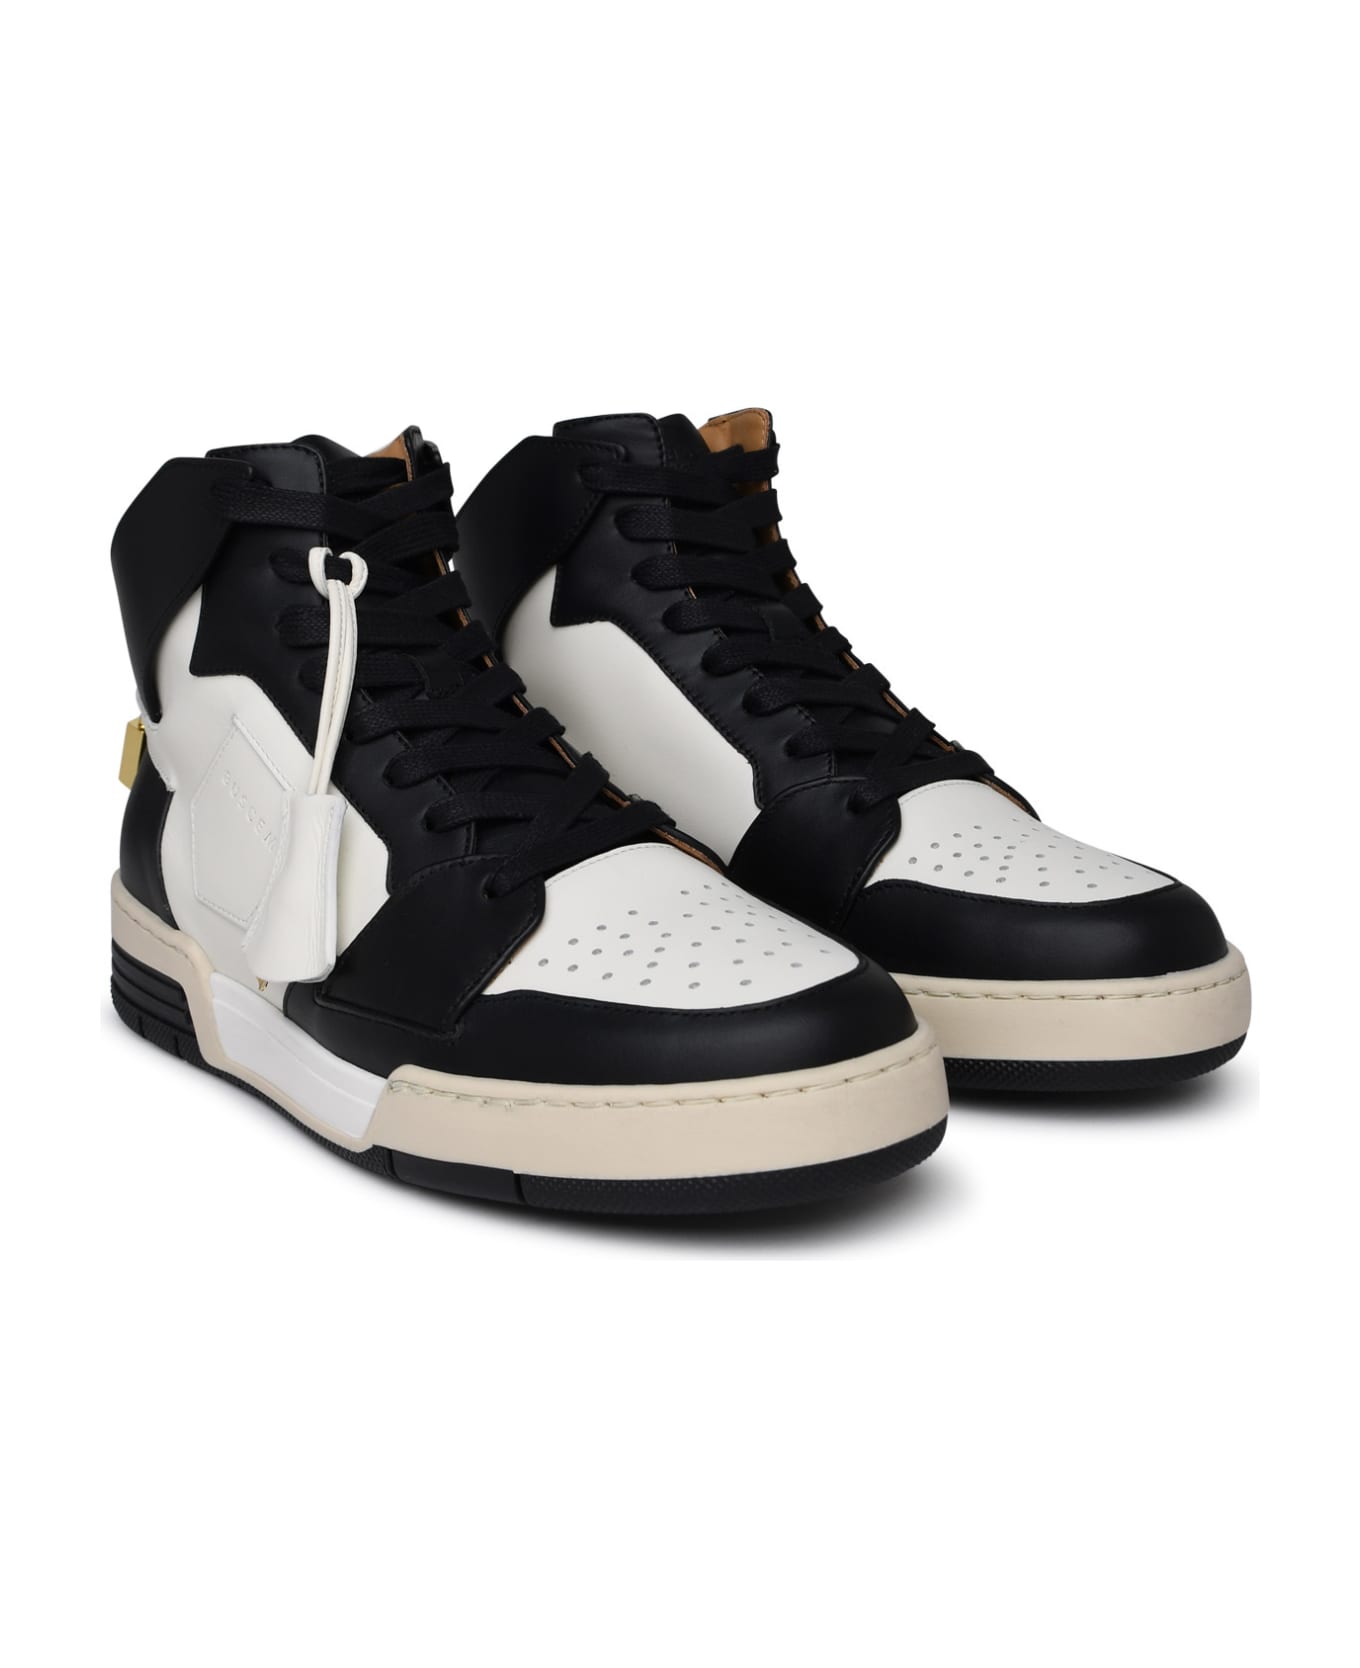 Buscemi 'air Jon' Black And White Leather Sneakers - White スニーカー